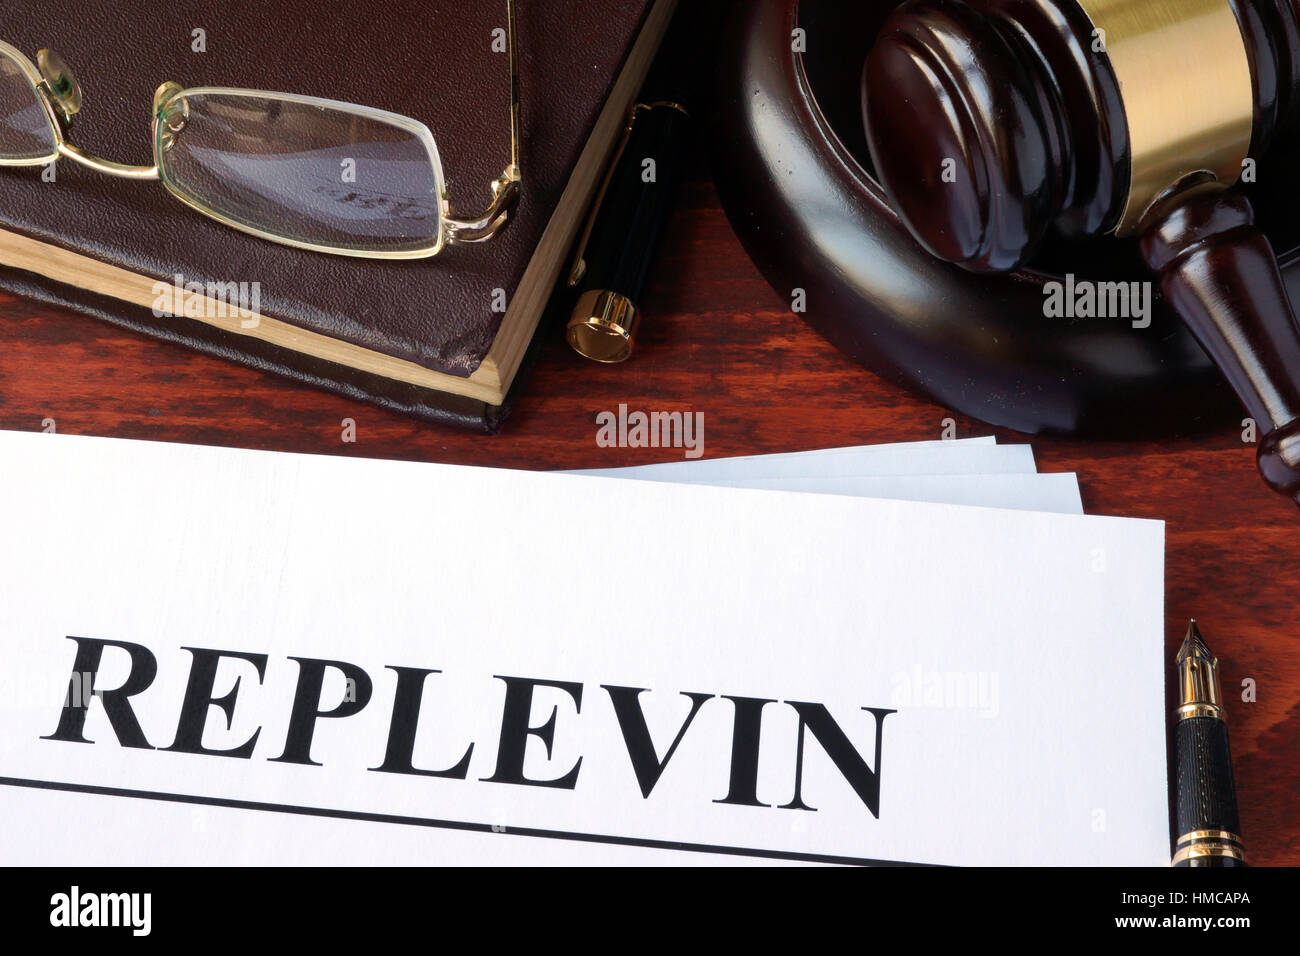 Replevin, documents and gavel on a table. Stock Photo